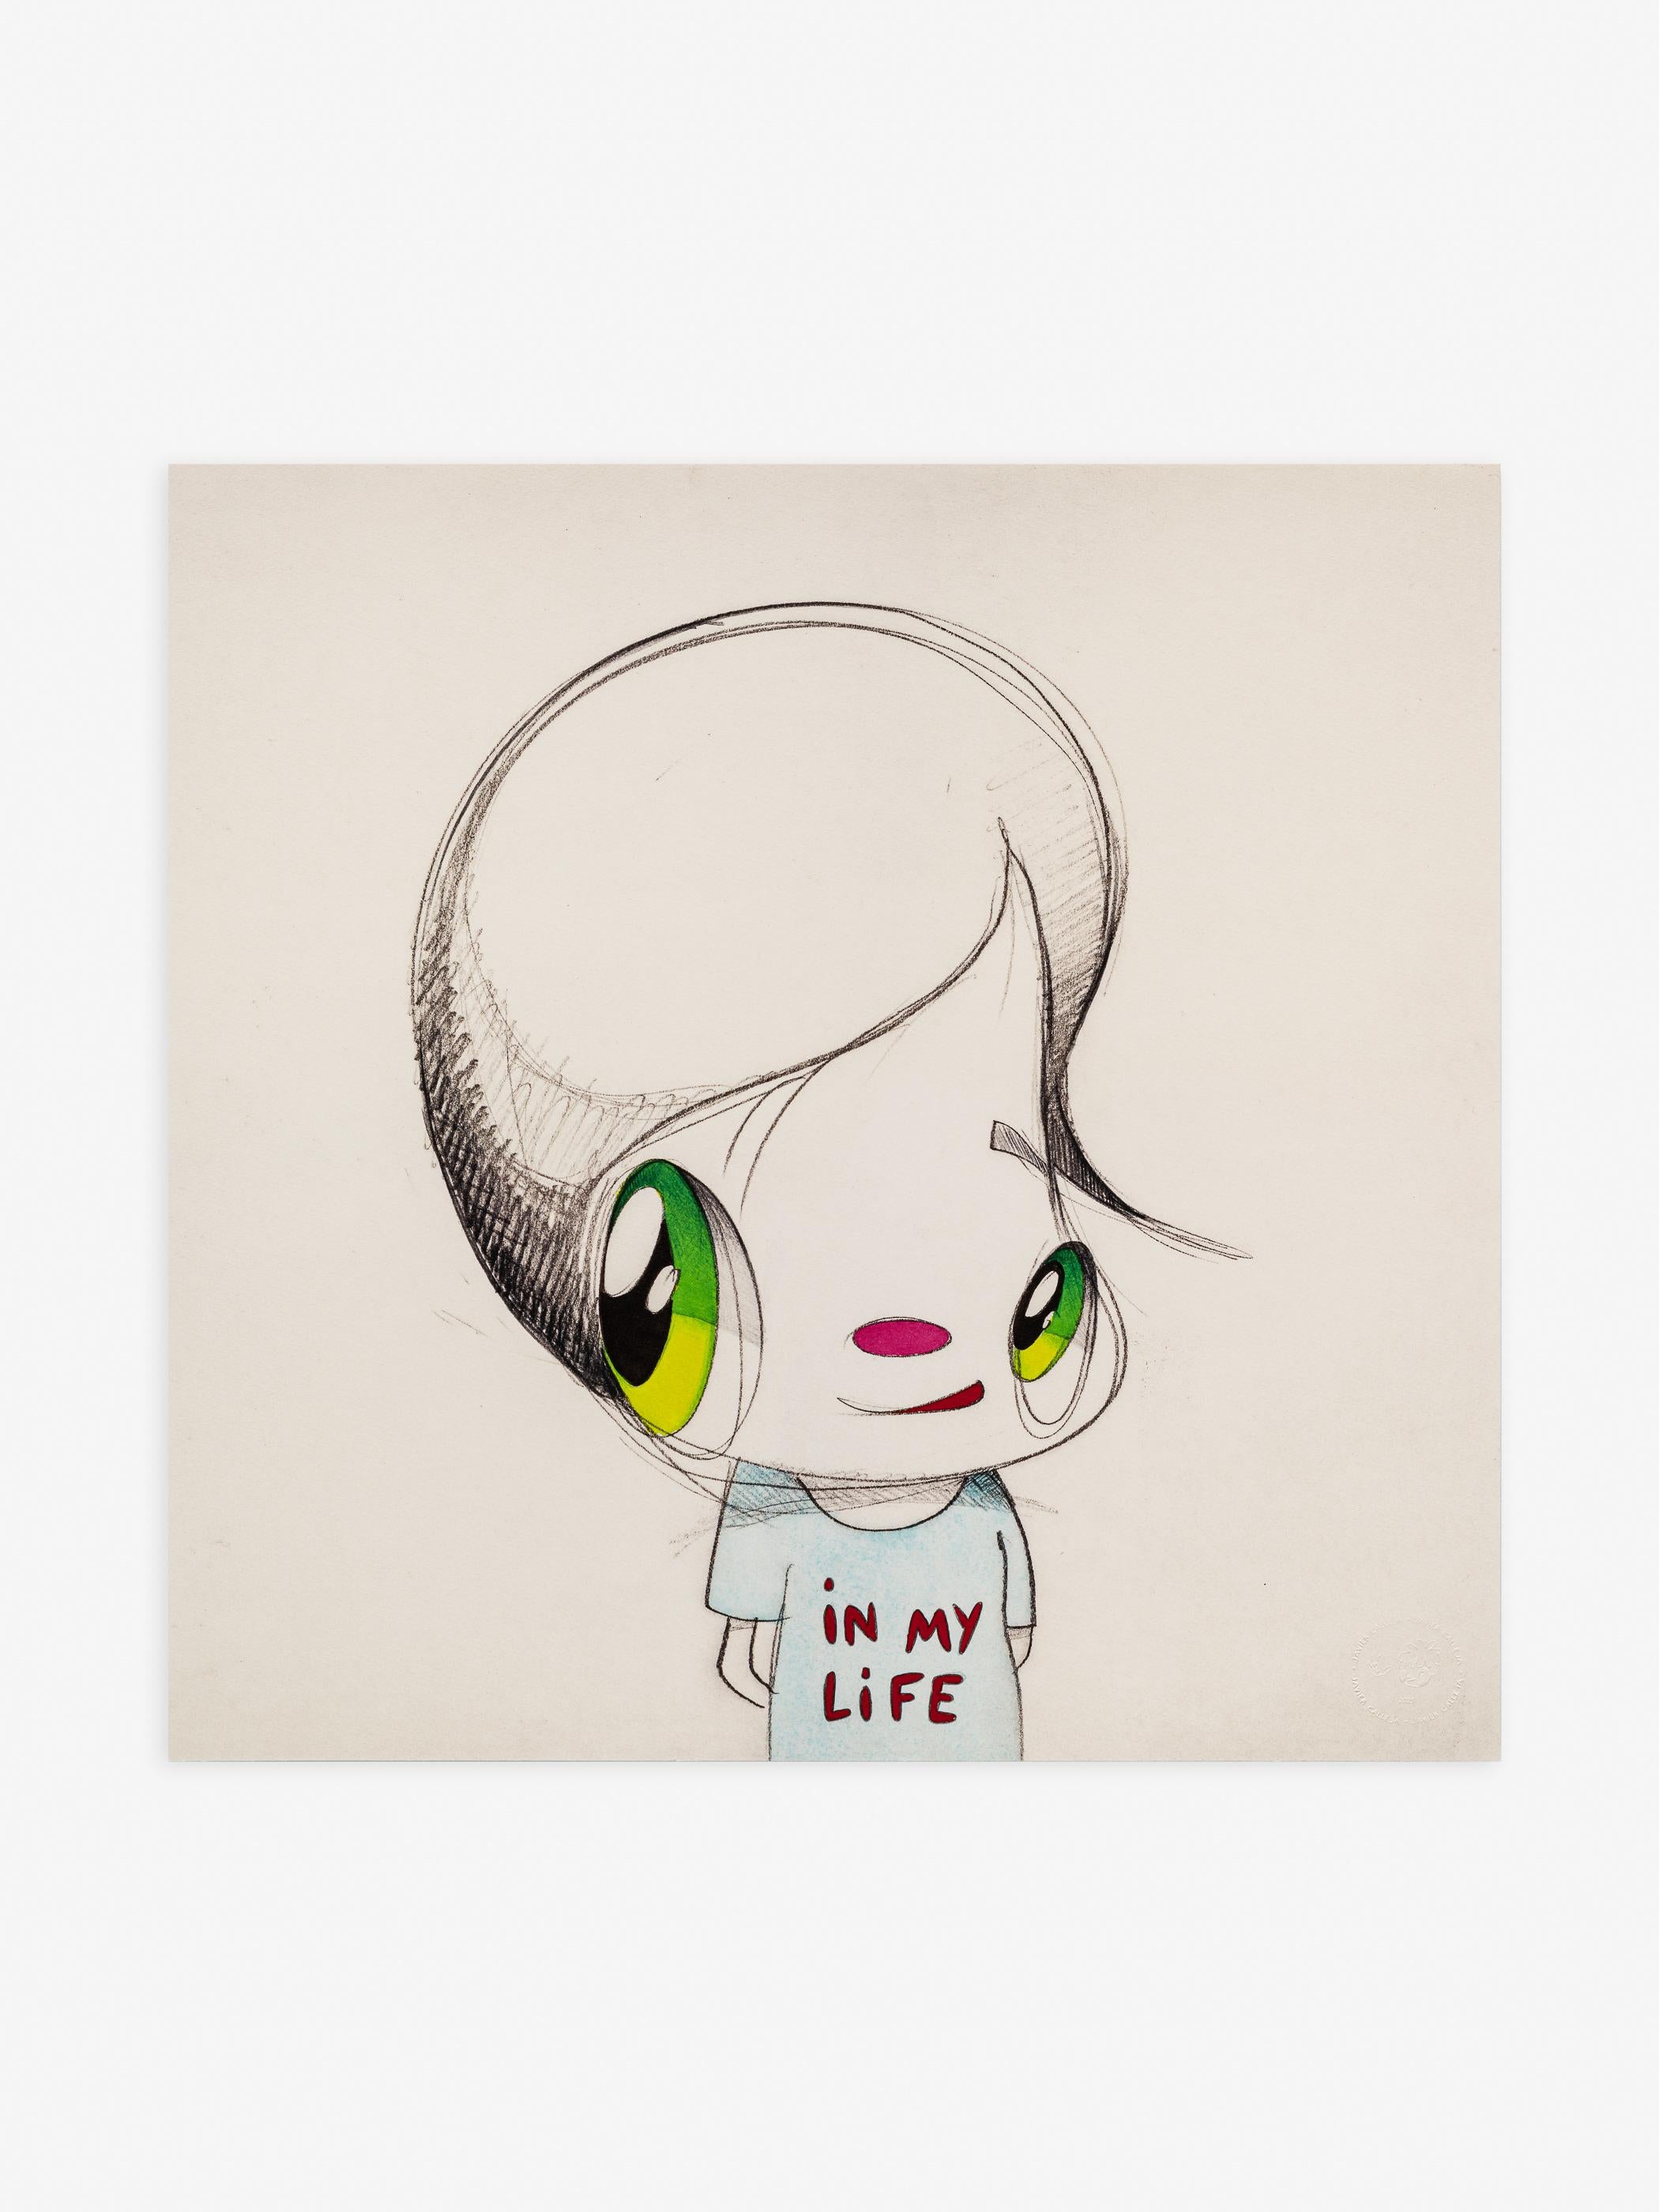 JAVIER CALLEJA - ONCE IN MY LIFE (DIPTYCH) Limited edition Modern Anime Design - Print by Javier Calleja